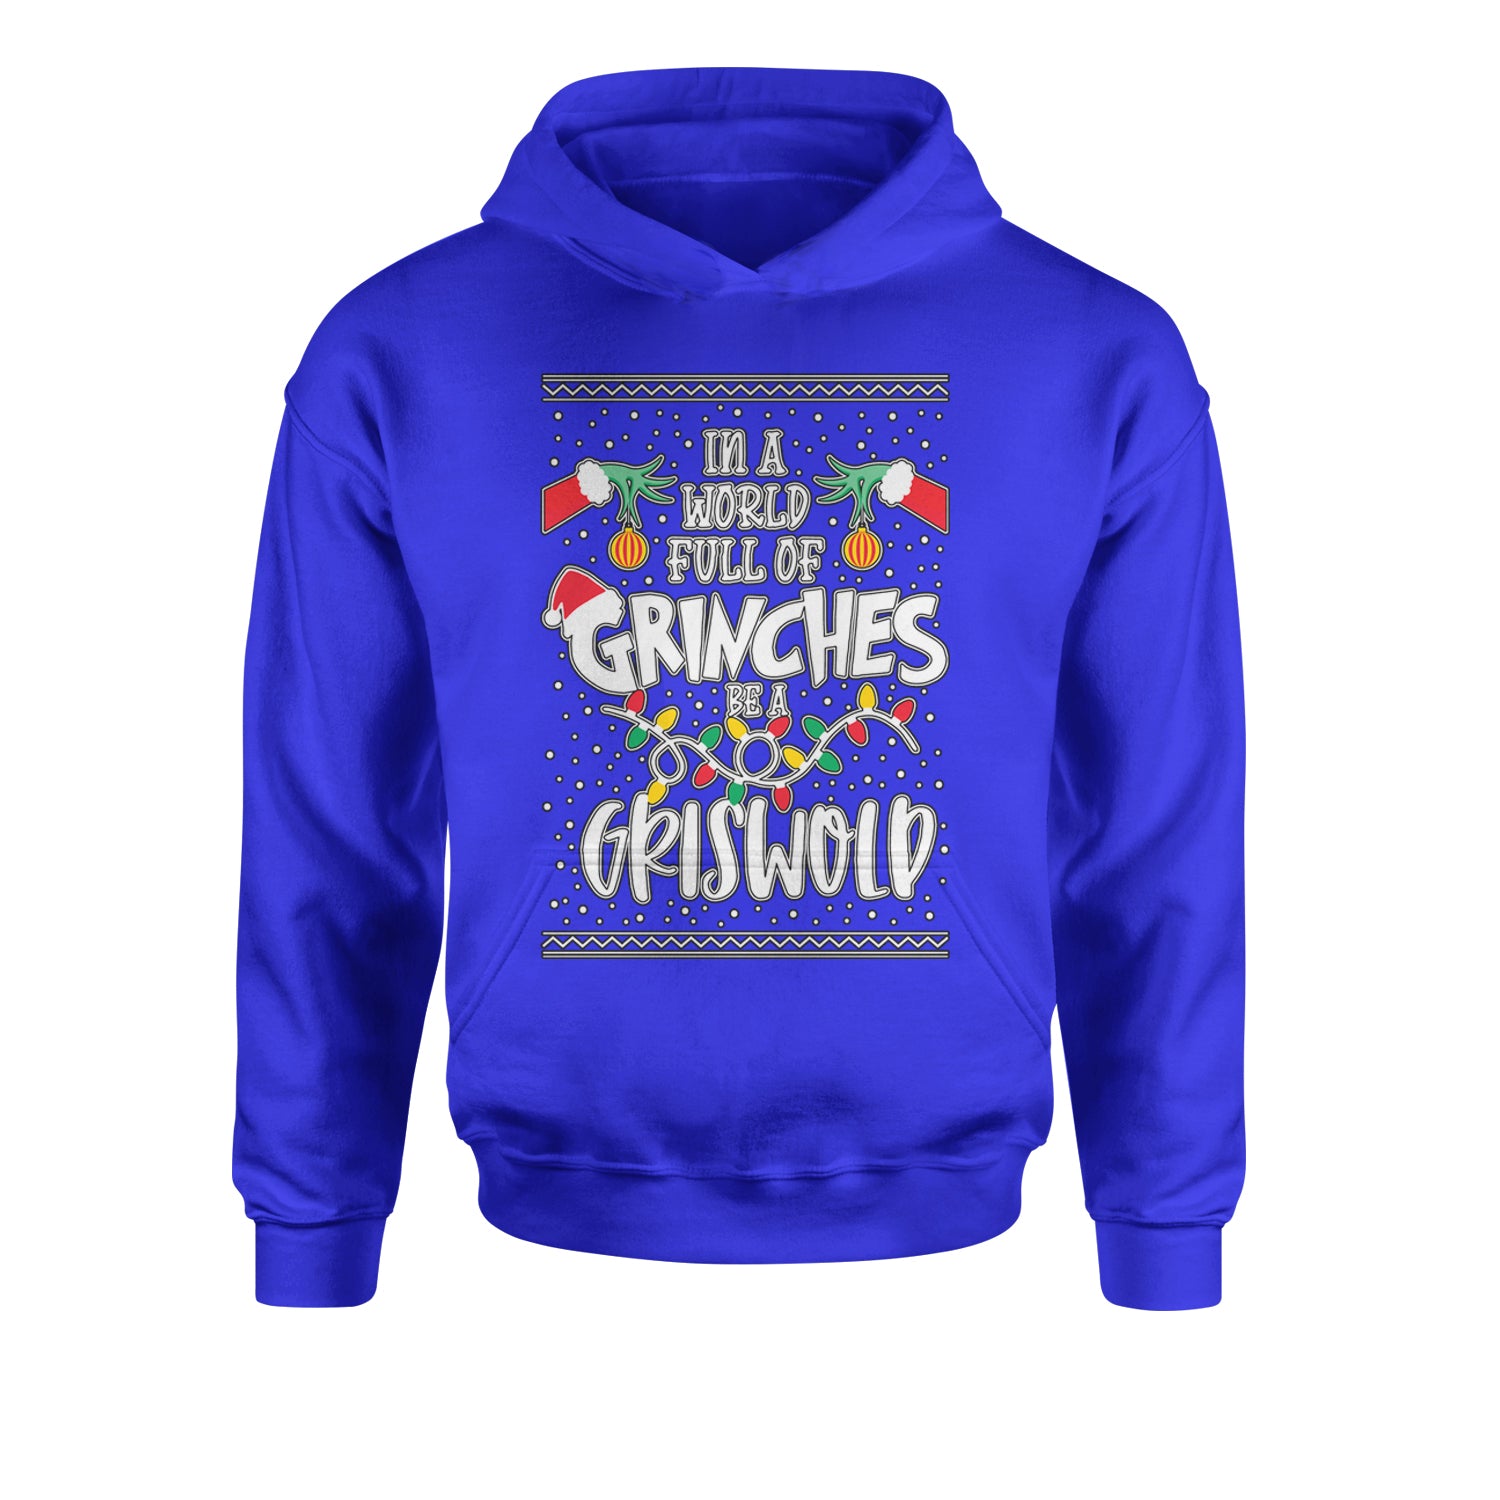 In A World Full Of Grinches, Be A Griswold Youth-Sized Hoodie clark, griswold, lampoon, margot by Expression Tees